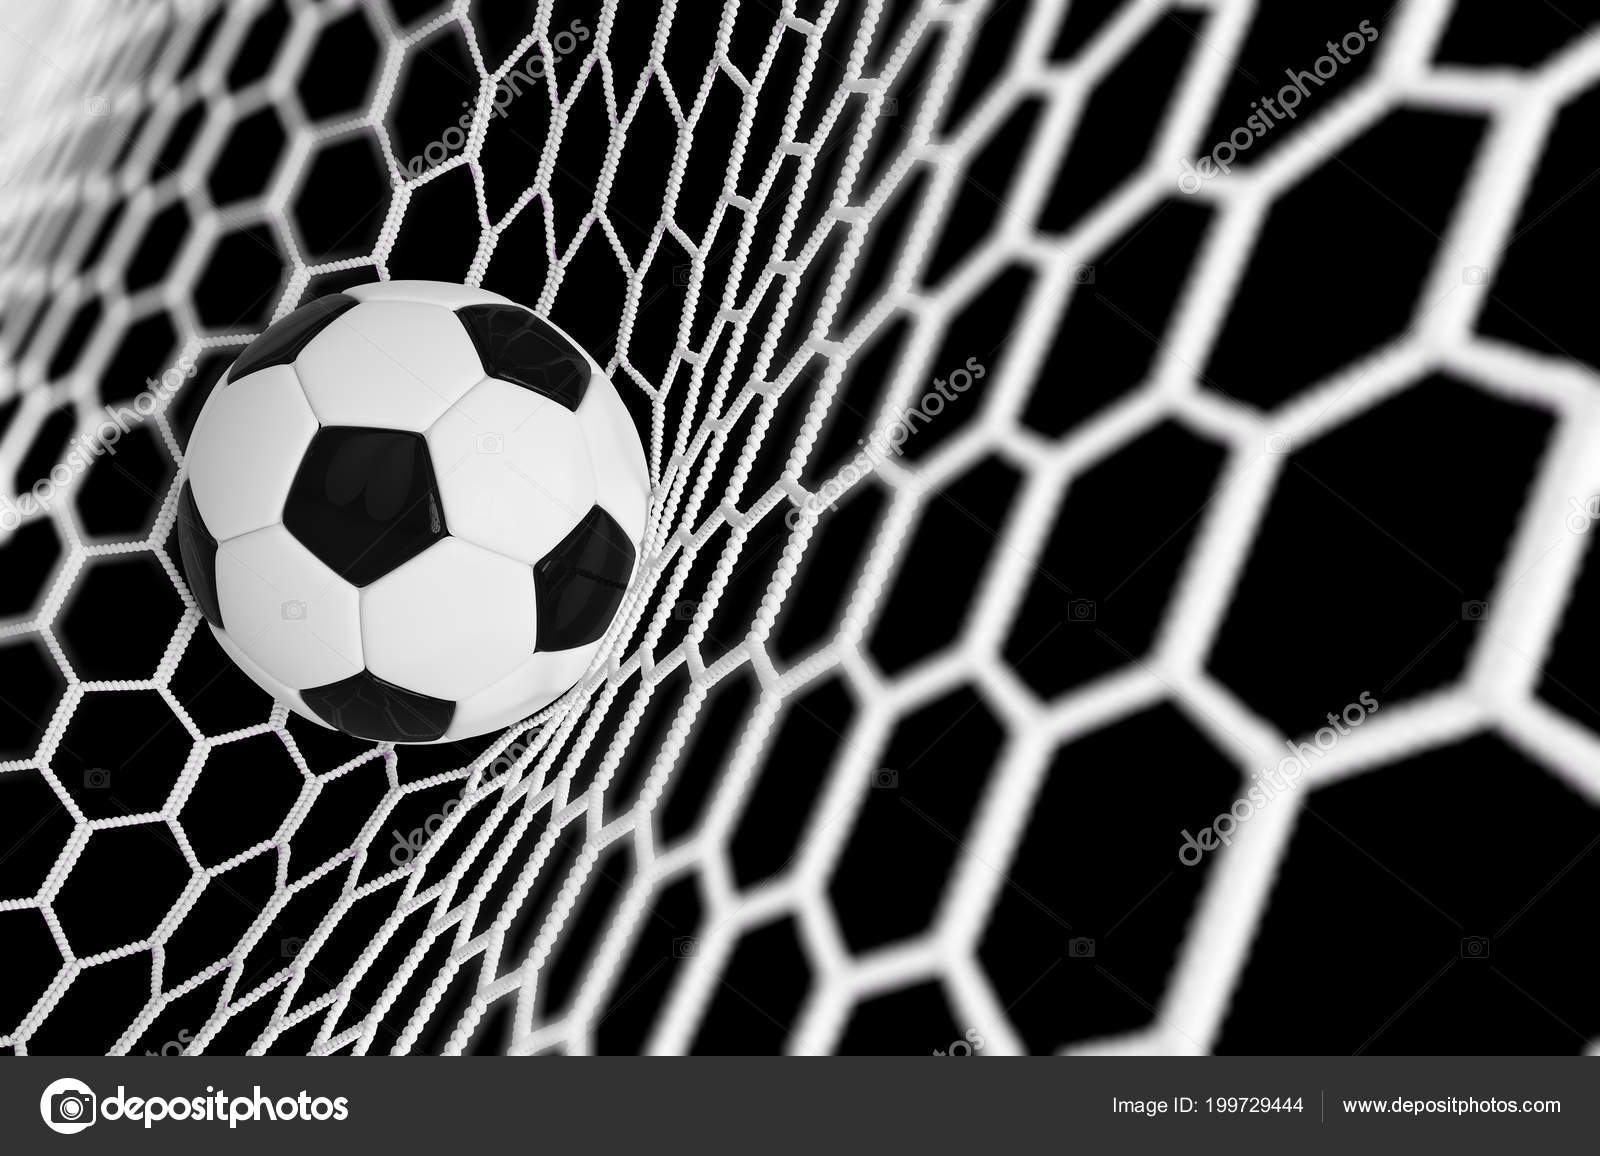 Soccer Or Football Banner With 3d Ballon Black Background Soccer Game Match Design Of Goal Moment With Realistic Ball In The Net Football Background Stock Photo Image By C Volmon Tut By